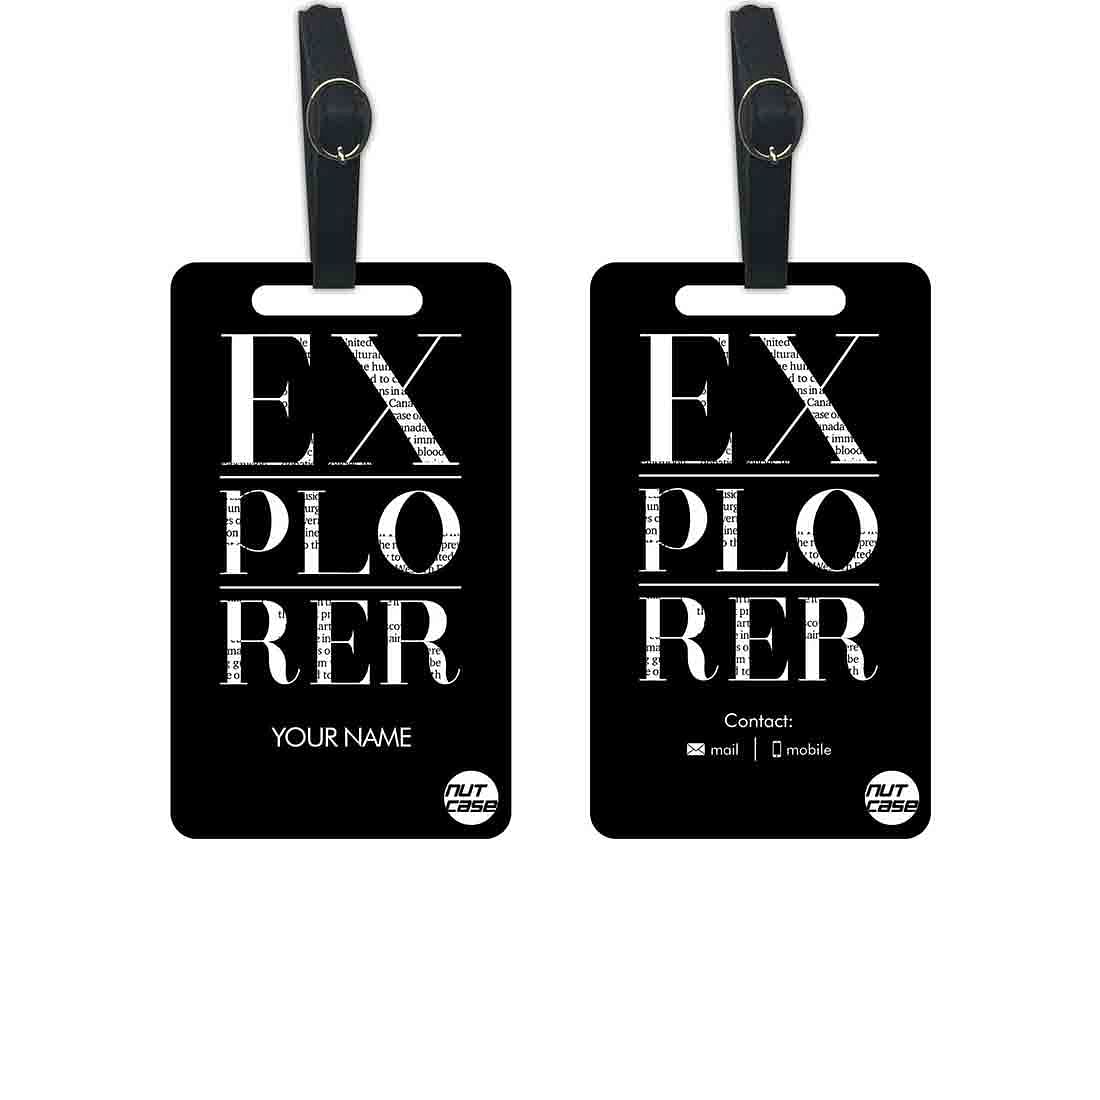 Customized Leather Suitcase Luggage Tags - Add your Name - Set of 2 Nutcase